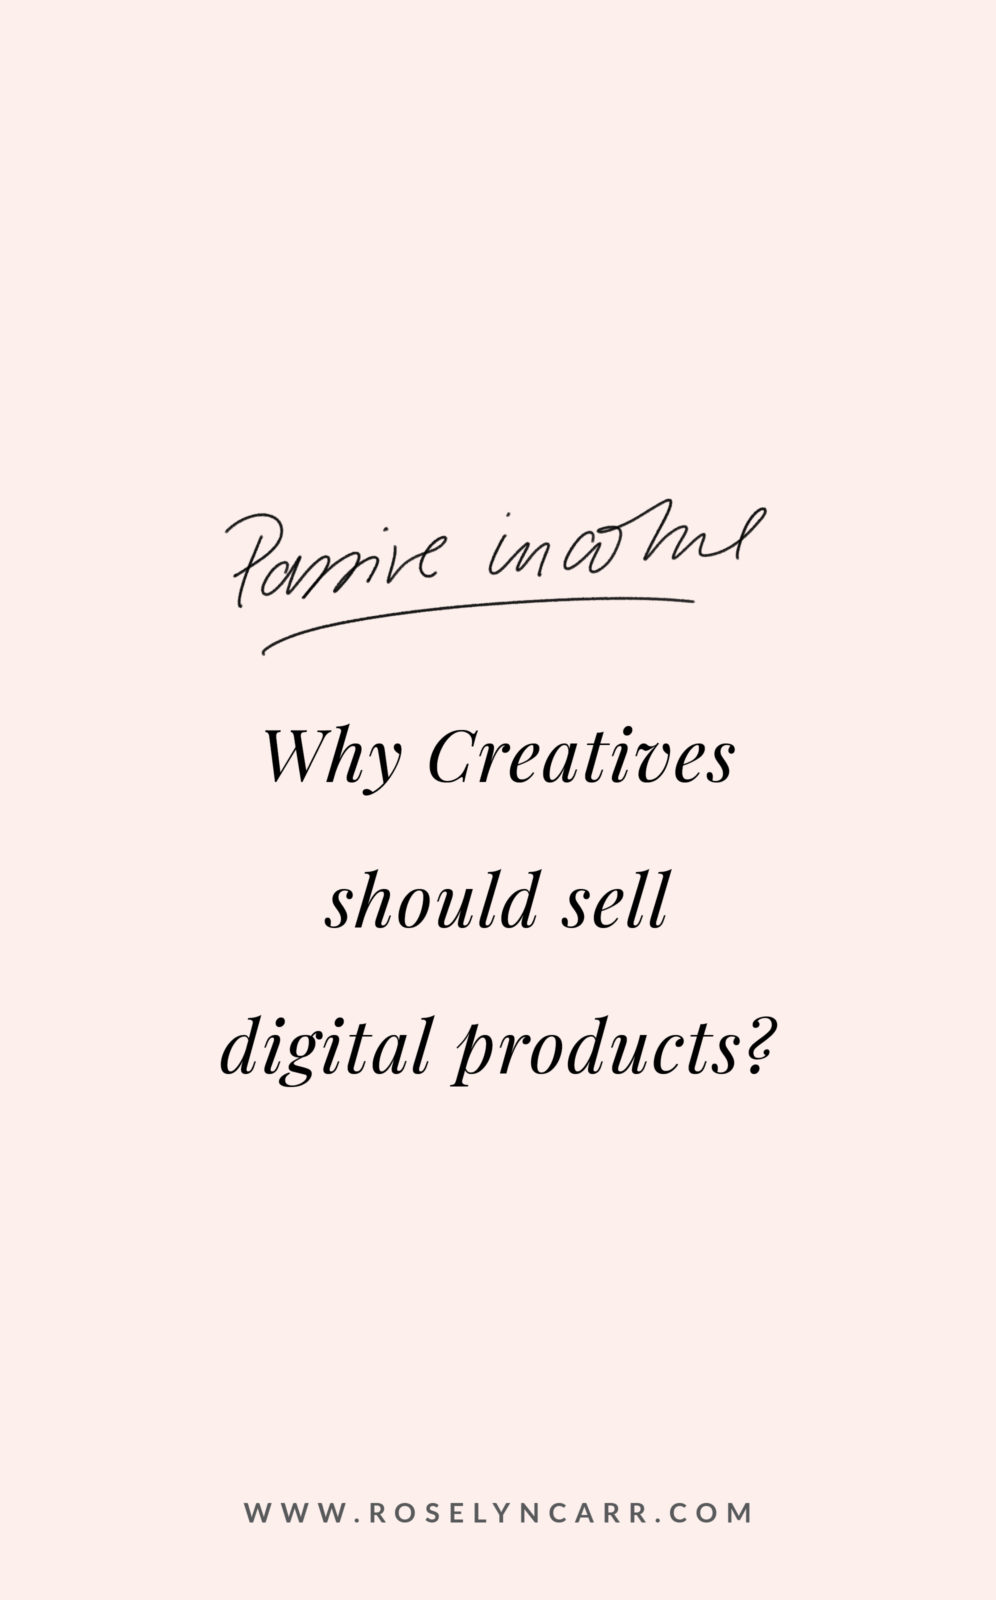 10 Reasons Creatives Should Sell Digital Products - Passive income